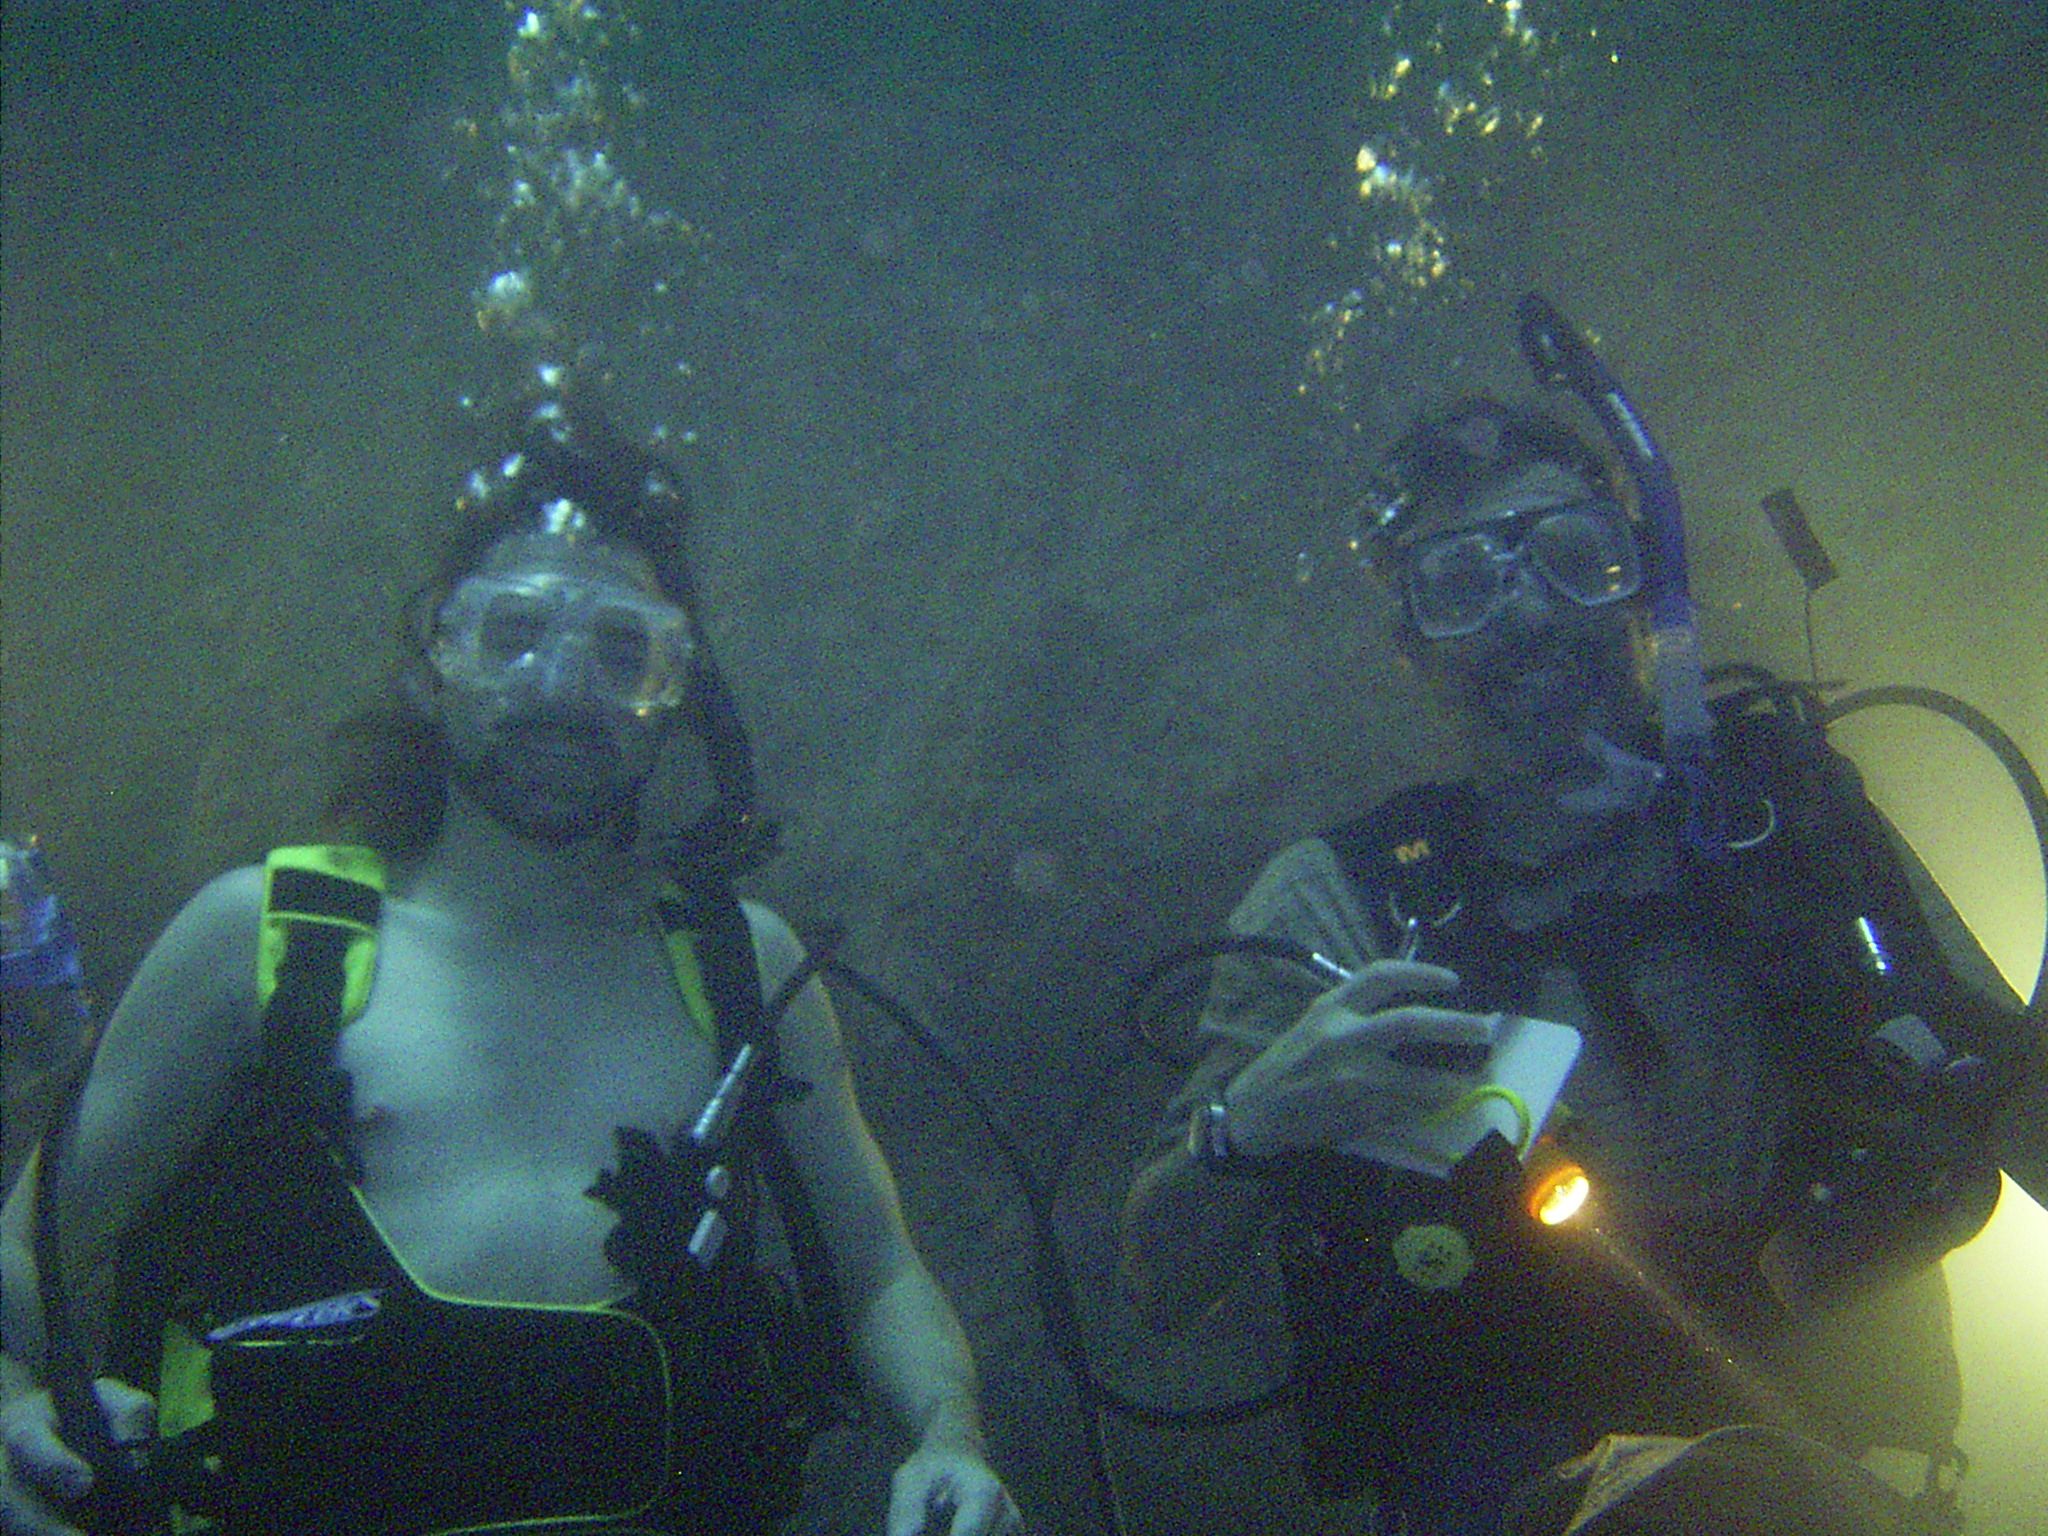 Two scuba divers enjoying the Hot Spring Diver experience at the Homestead Crater